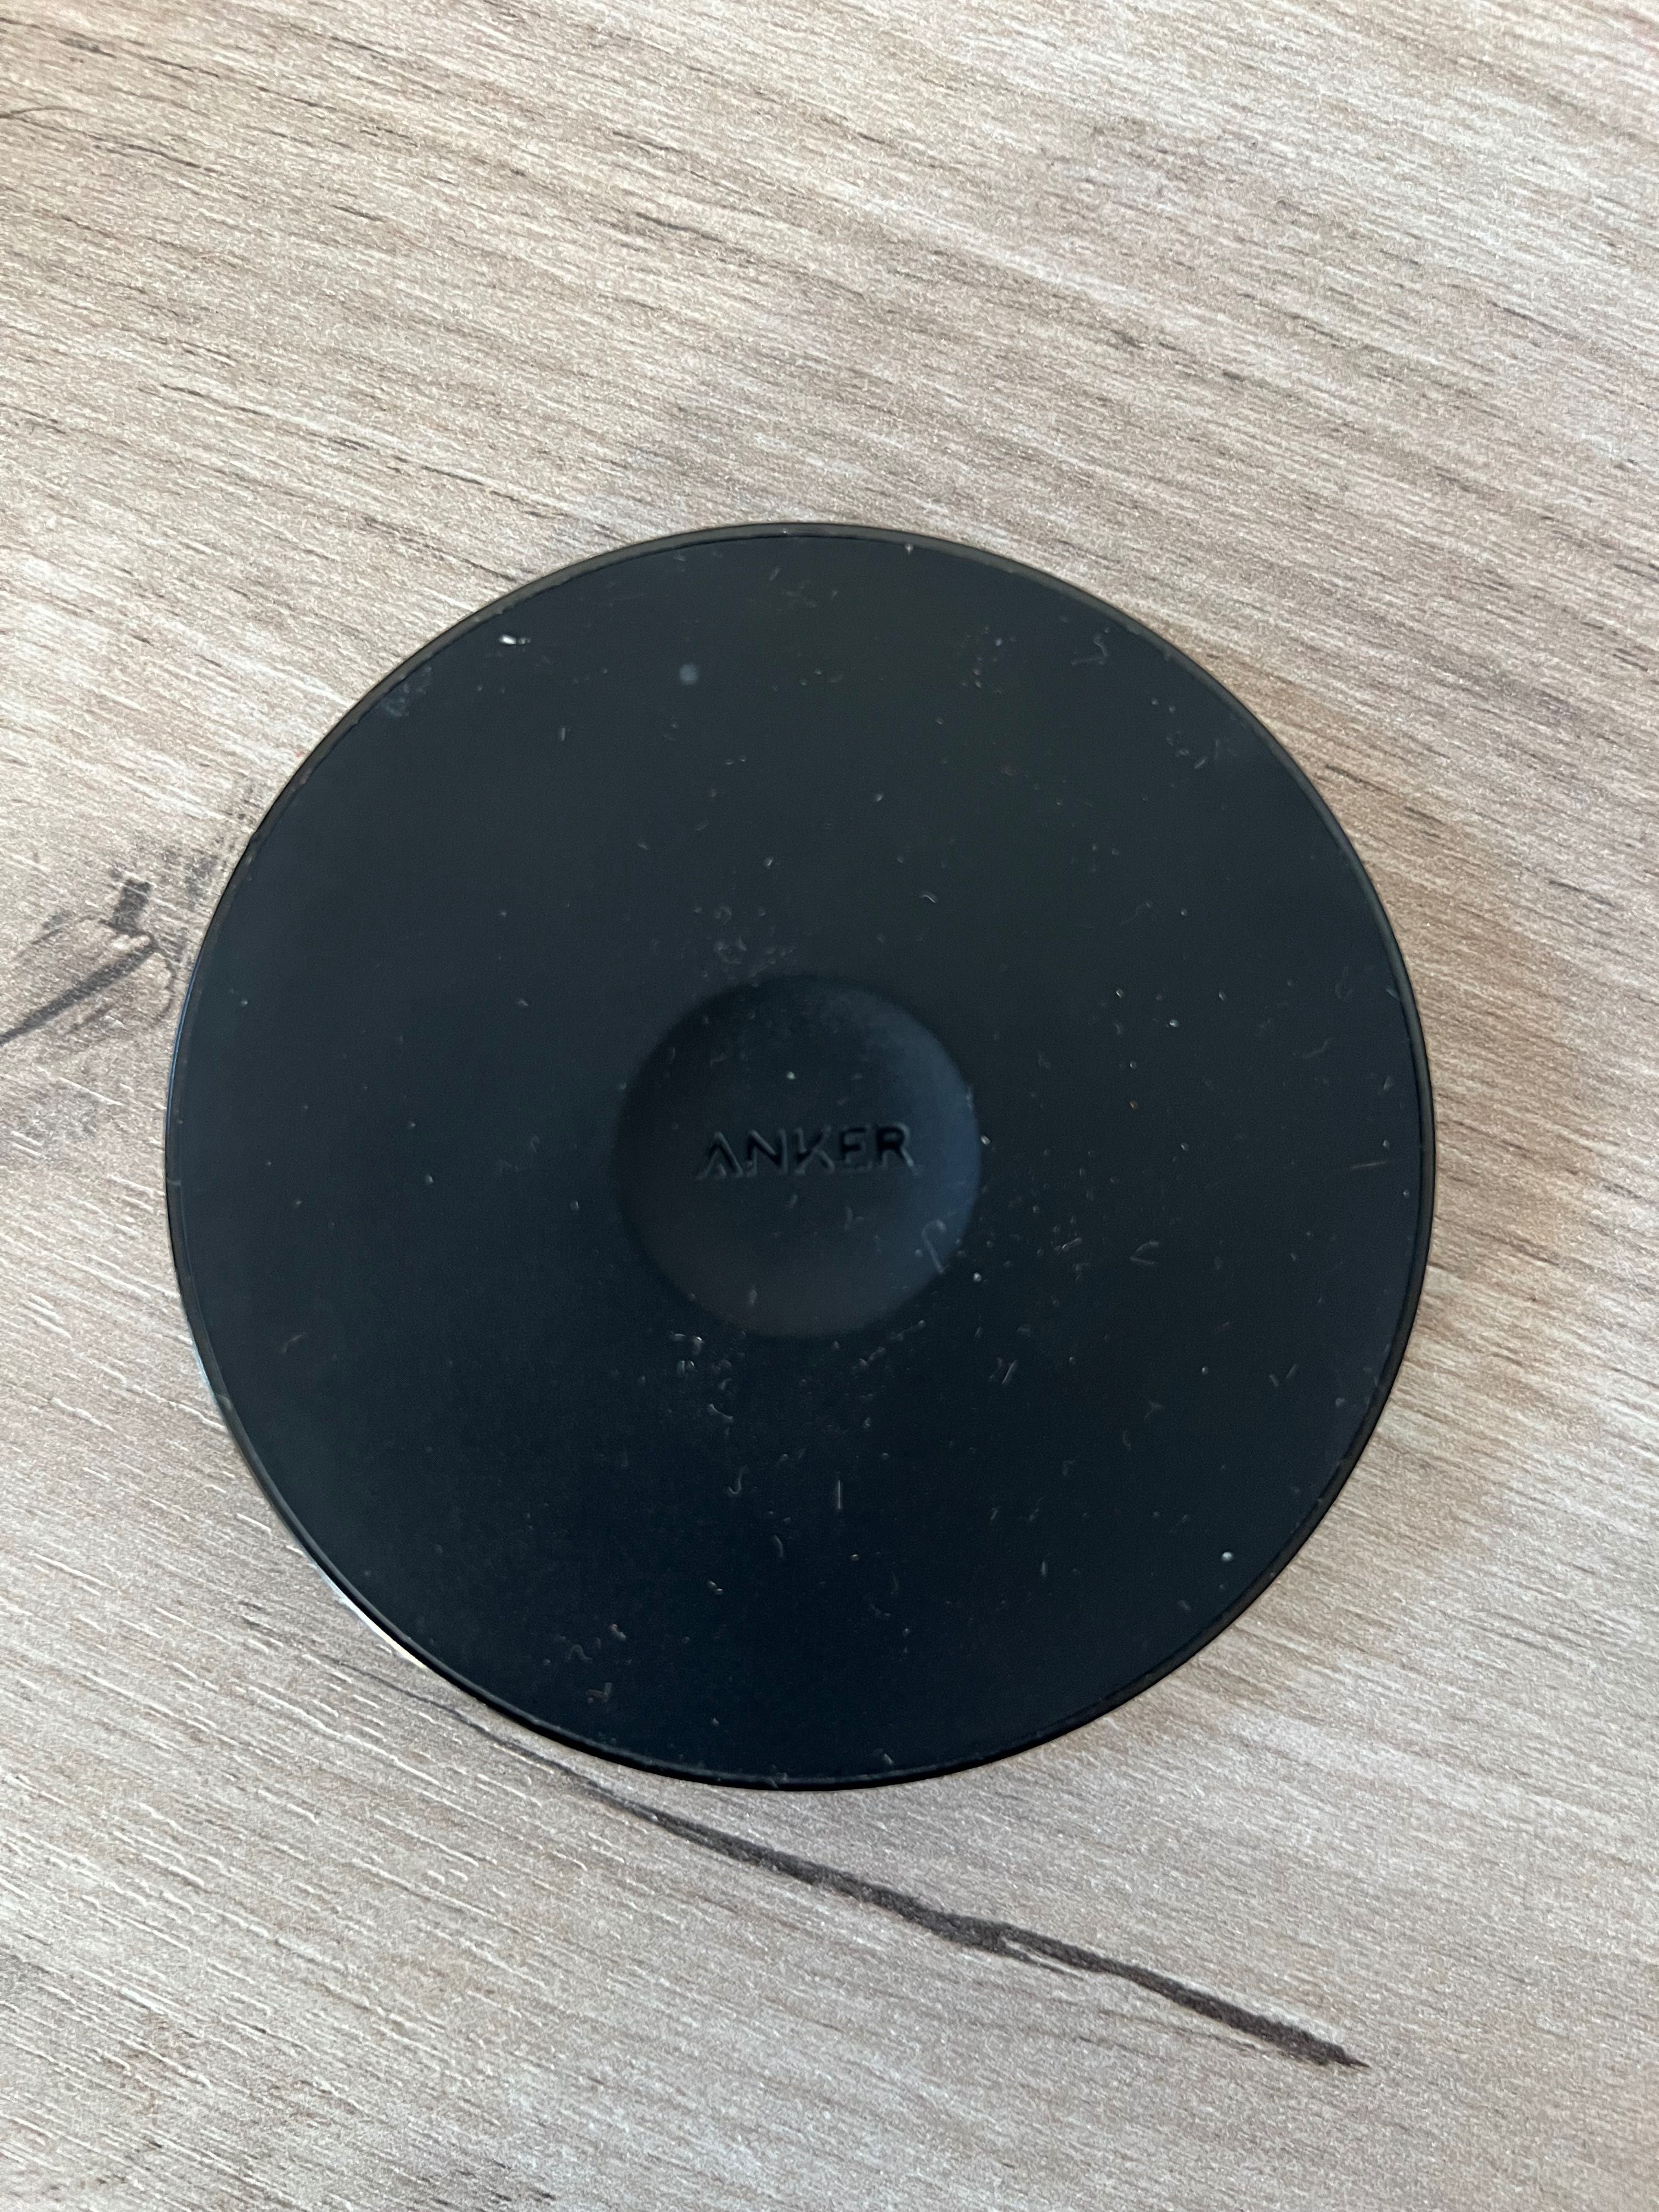 Anker wireless charger micro usb